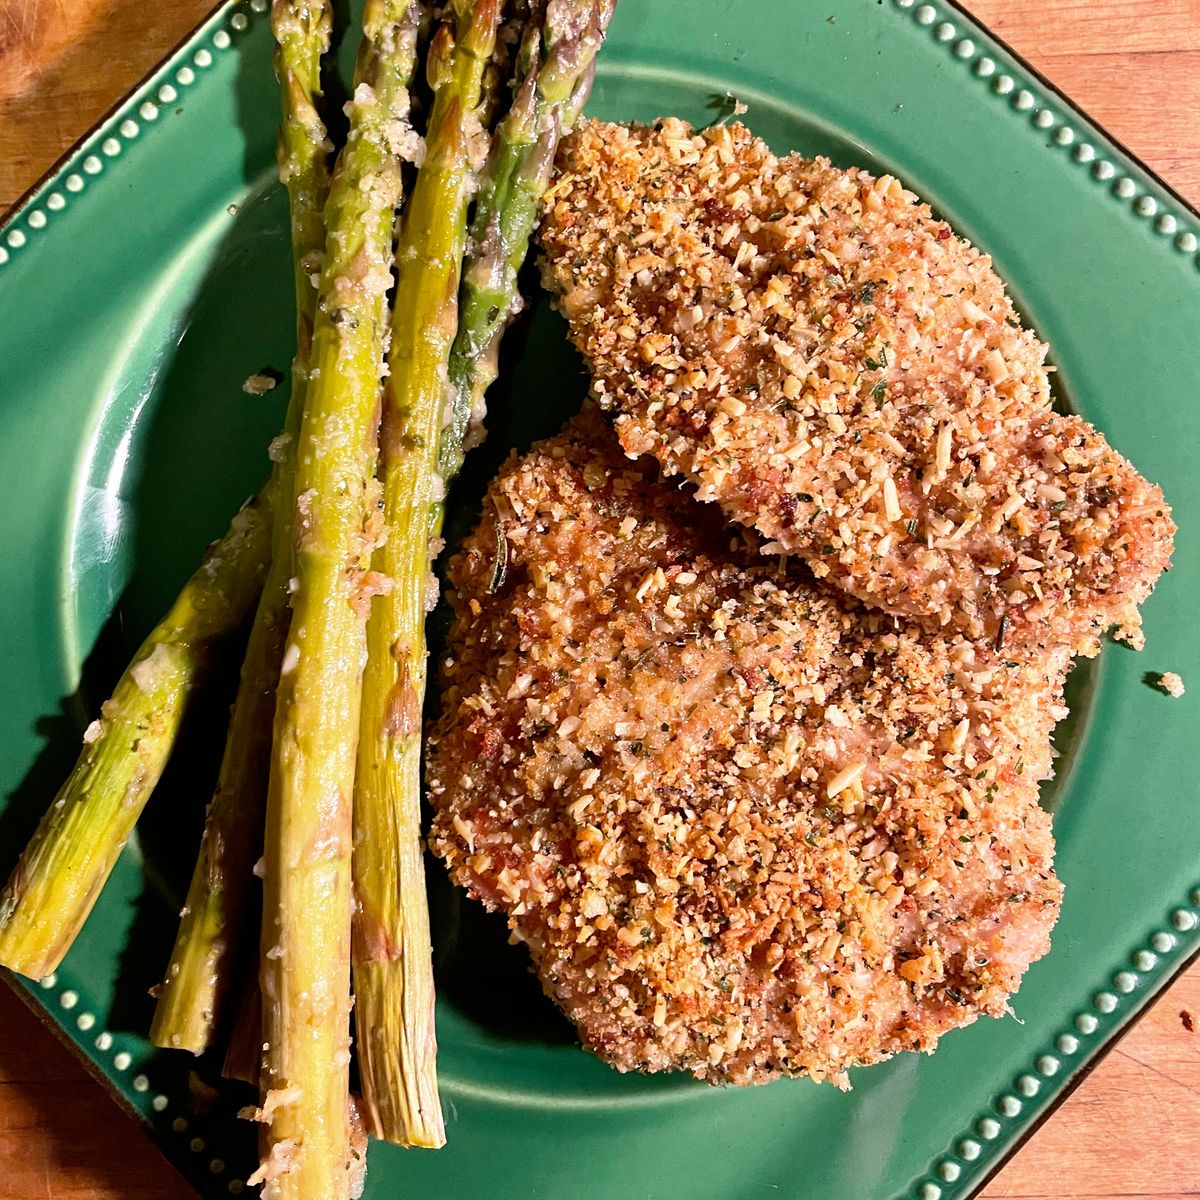 Baked Parmigiana and Panko Crusted Chicken Paillard with Asparagus